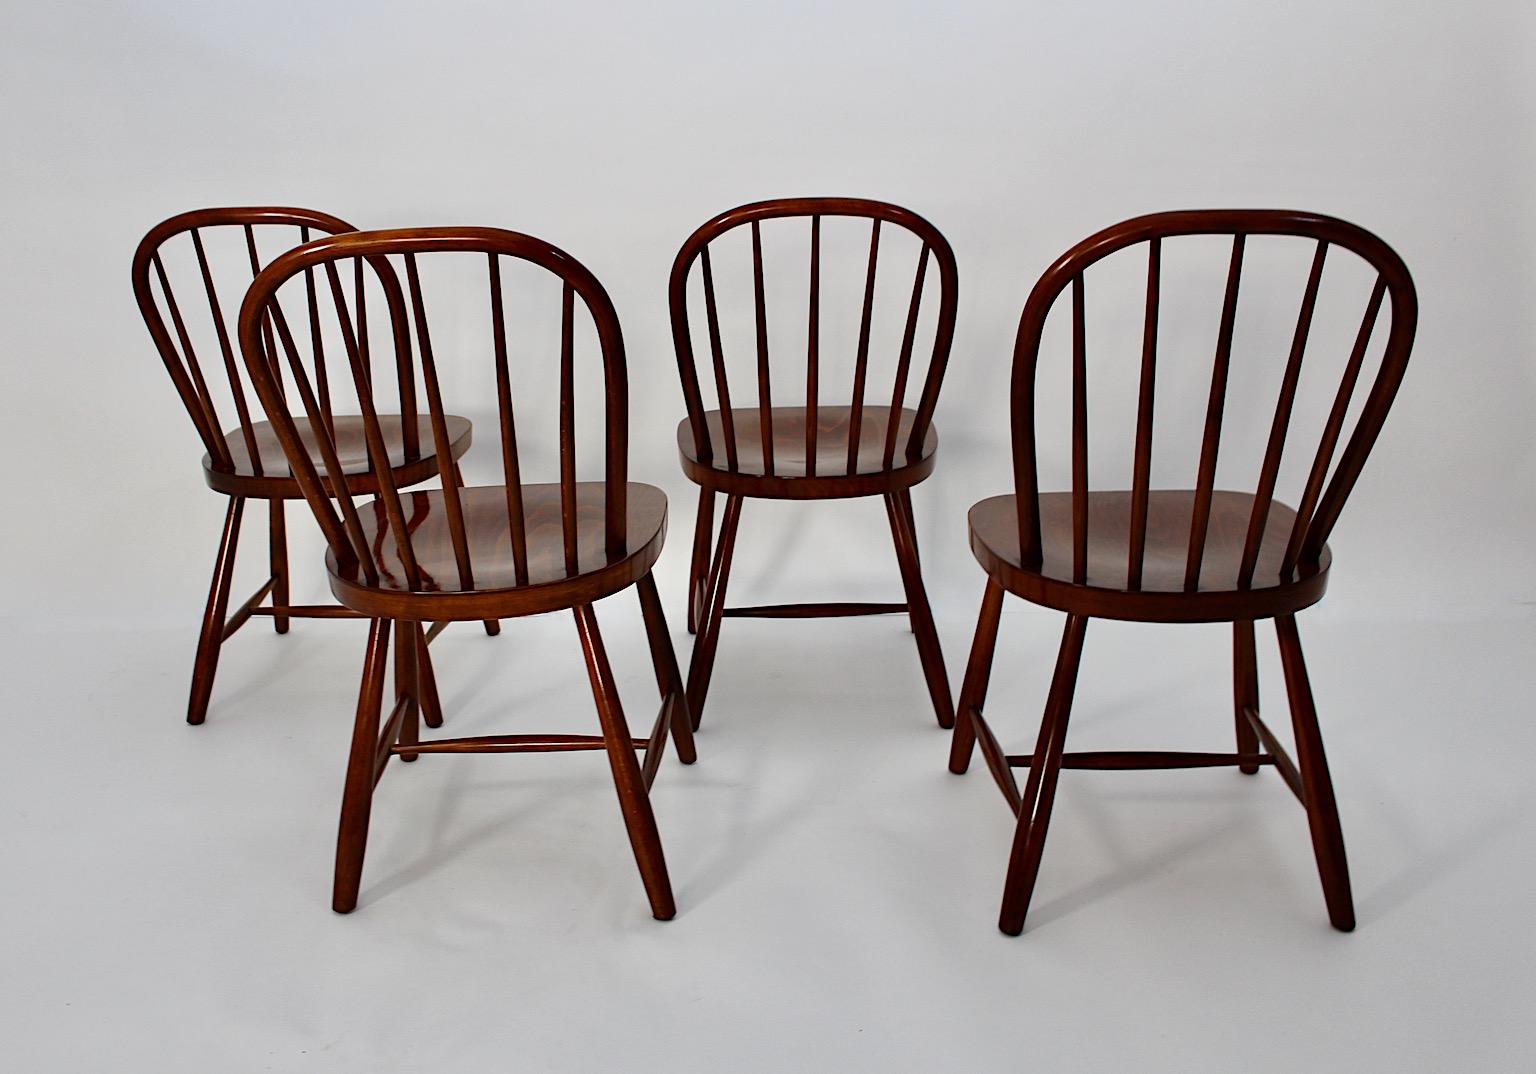 Art Deco Vintage Beech Windsor Dining Room Chairs Four Josef Frank 1920s Vienna For Sale 3